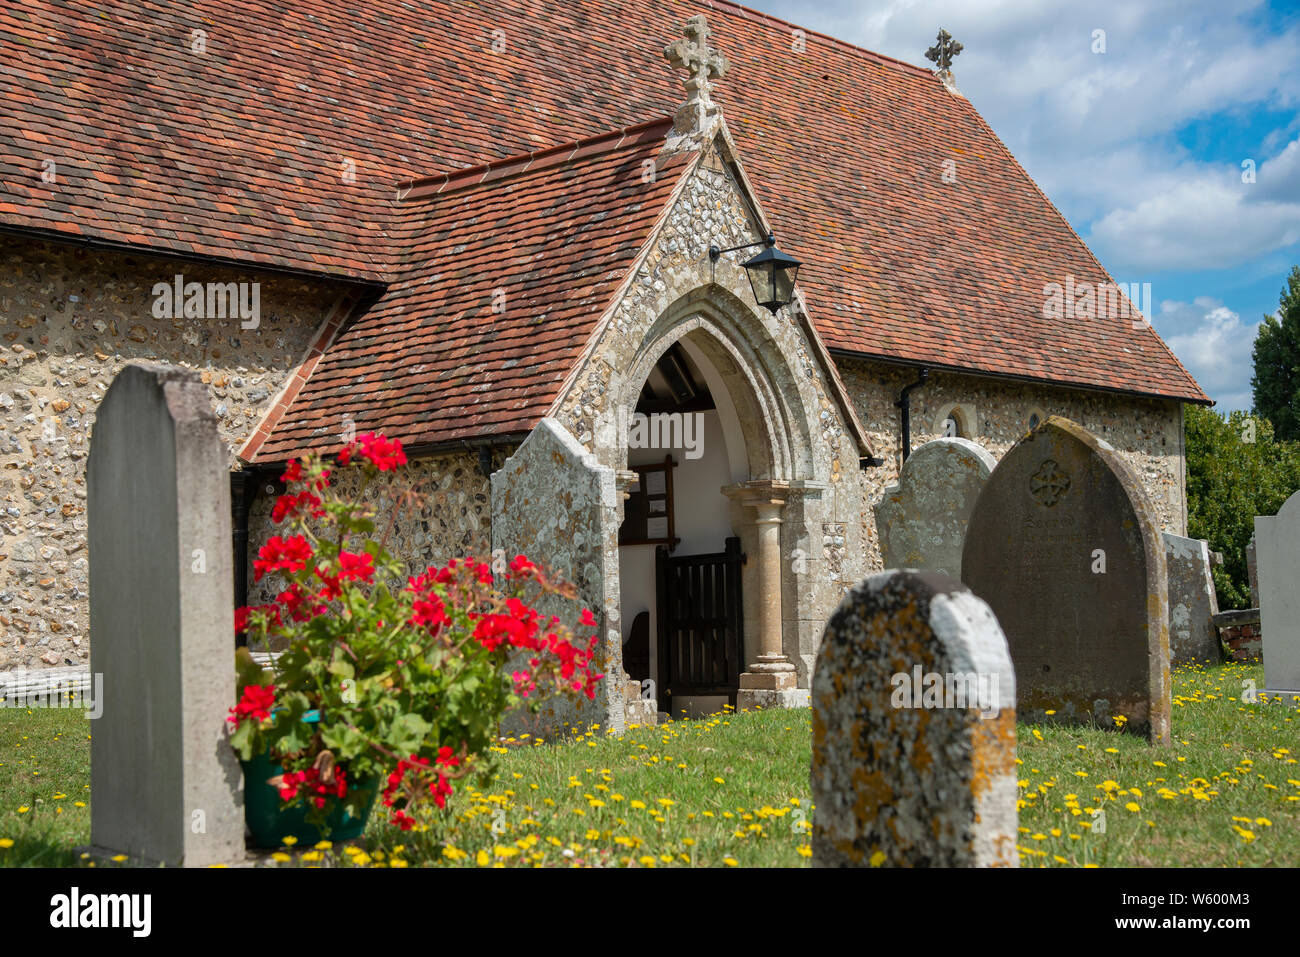 The church porch of the Anglican St Nicholas Church, West Itchenor, Chichester Harbour, Chichester, West Sussex, England, United Kingdom Stock Photo